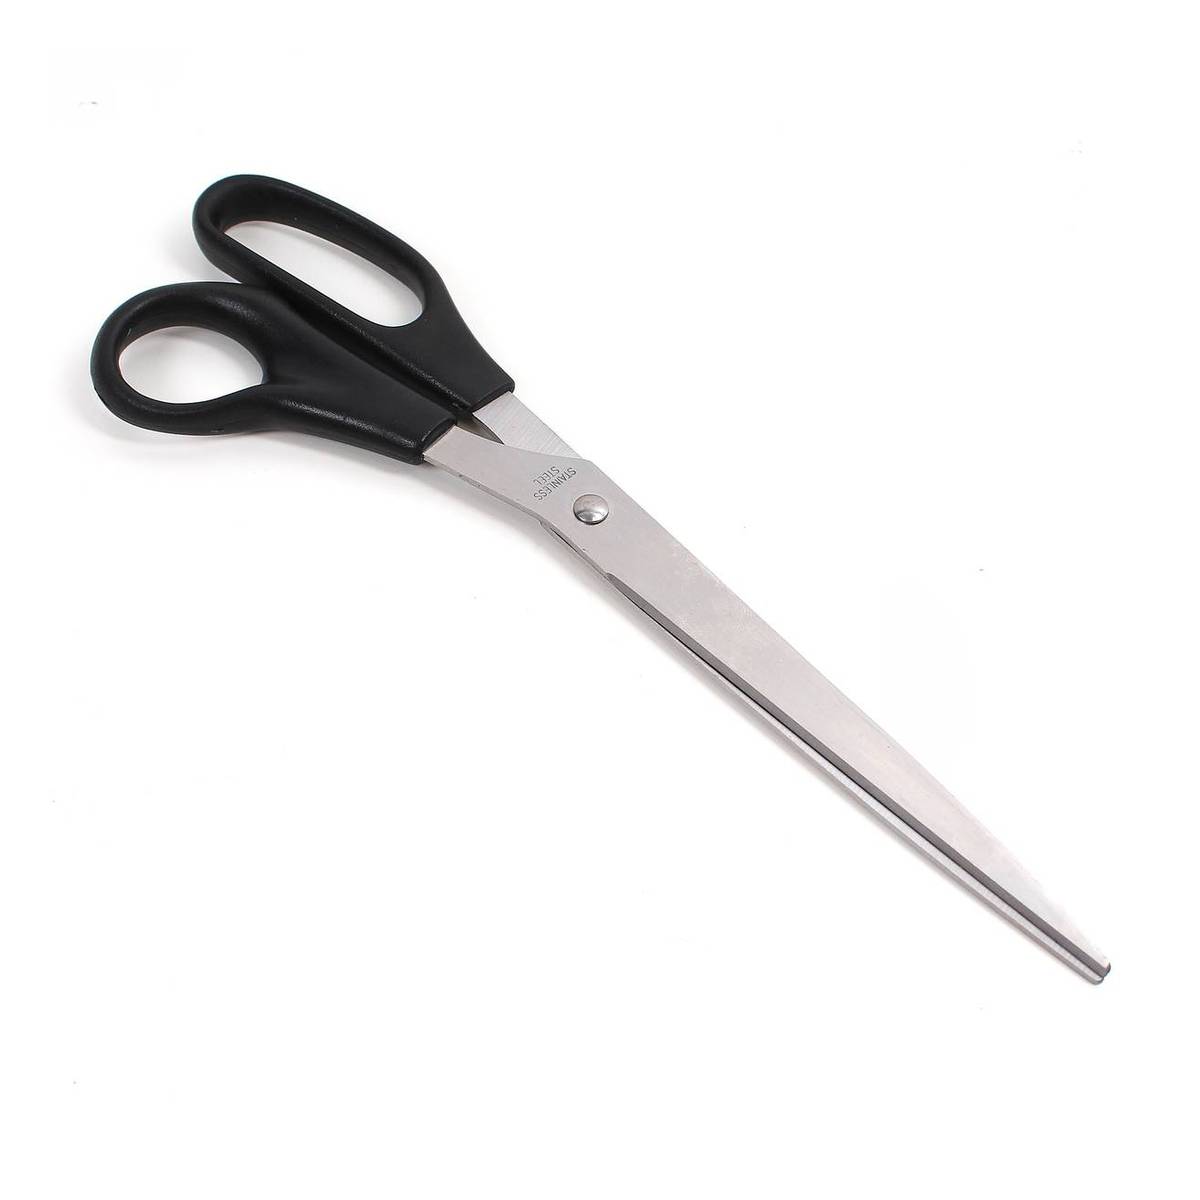 The office image Star age restriction scissors Inquire leadership Or